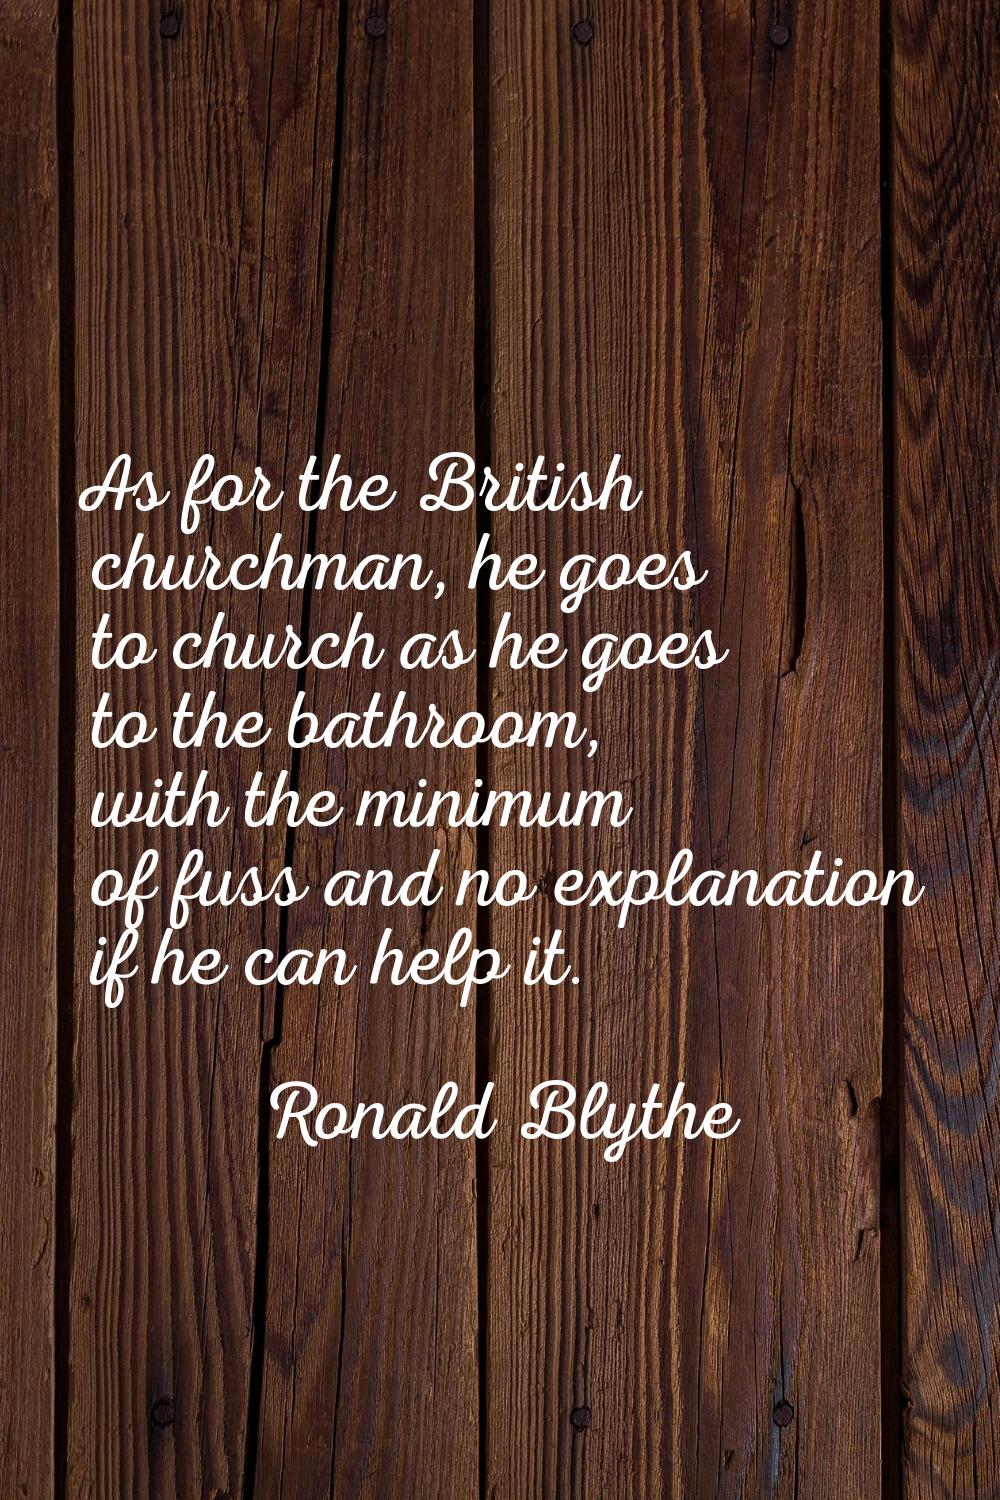 As for the British churchman, he goes to church as he goes to the bathroom, with the minimum of fus